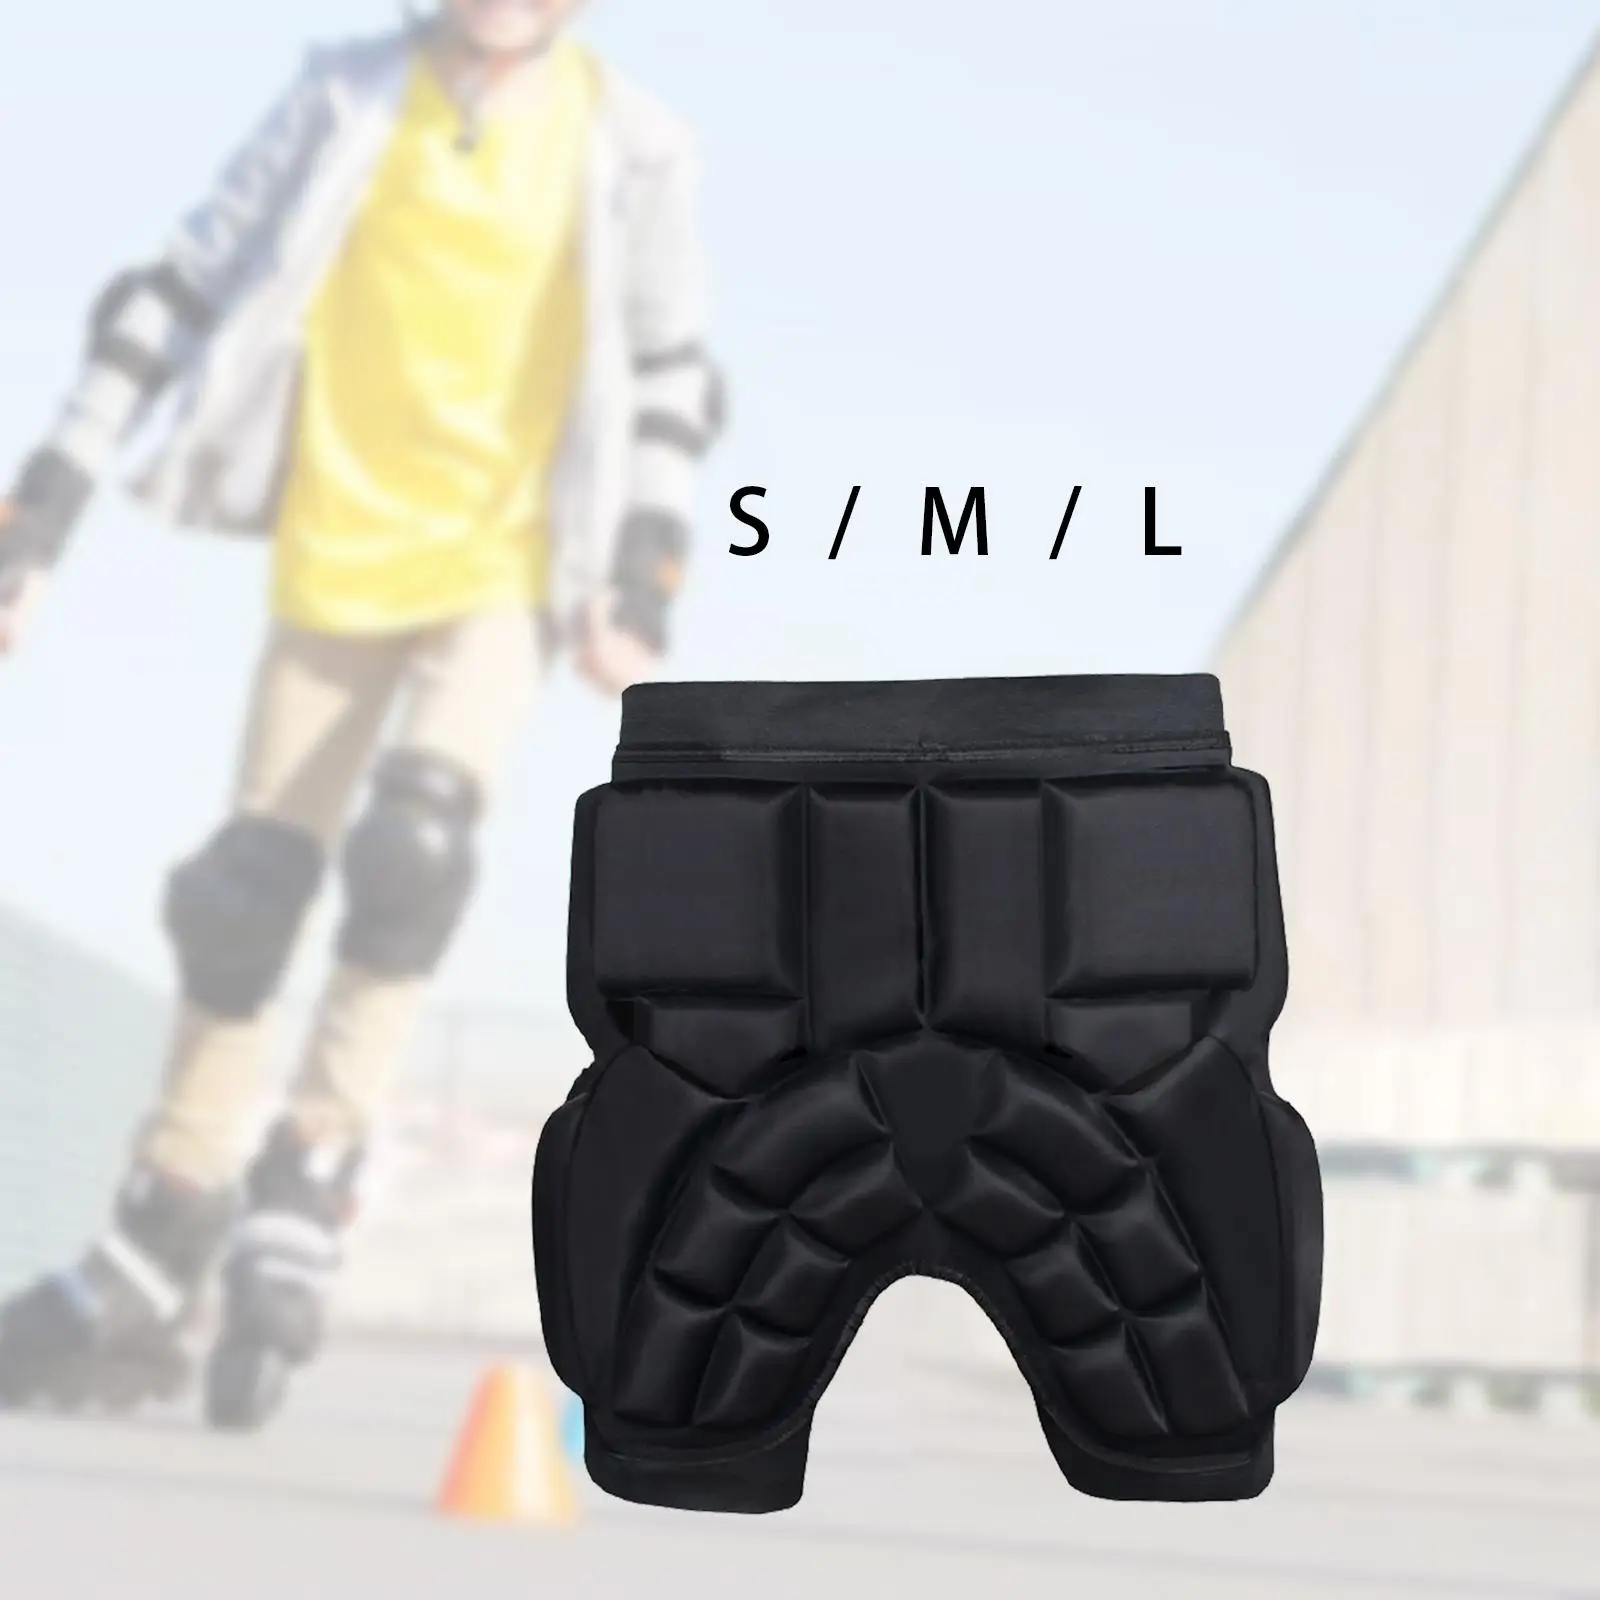 Hip Guard Pad Supporter Compression Protective Guard Pad Padded Hip Protection for Skateboarding Skiing Cycling Sports Climbing